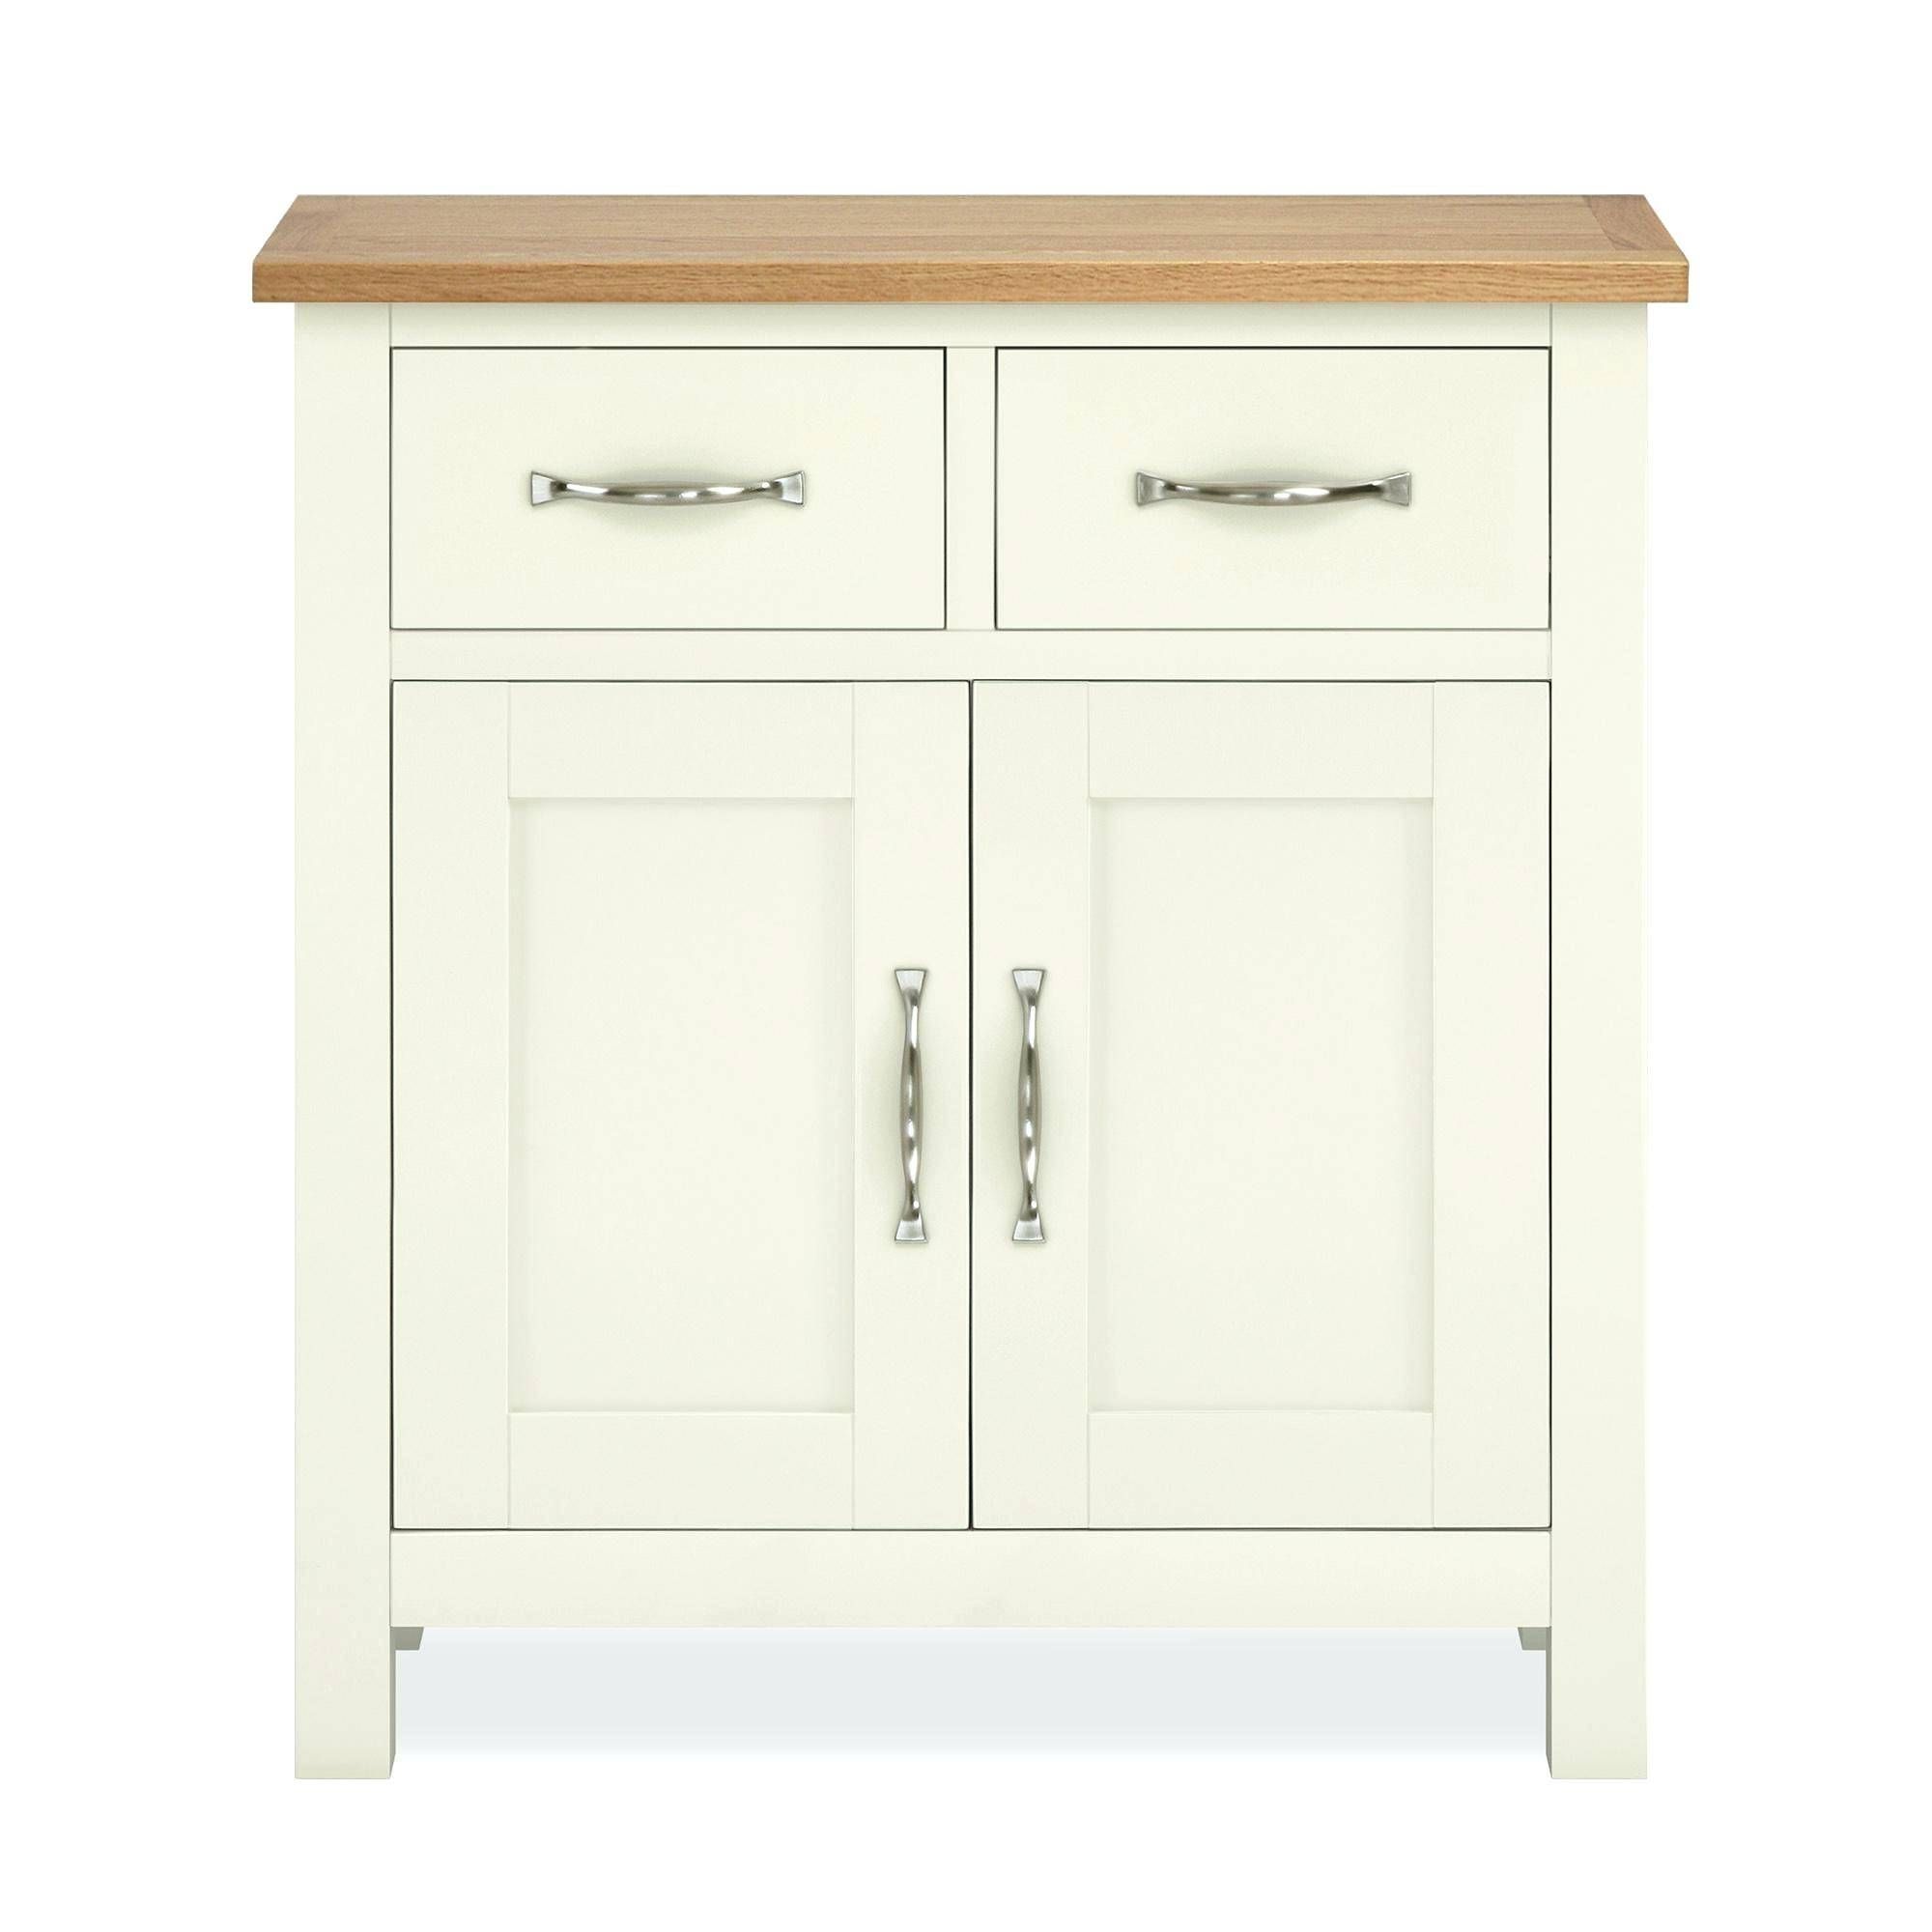 Cream Sideboard Mark Oak And Cream Sideboard Medium Cream High In Most Up To Date Cream Gloss Sideboards (View 9 of 15)